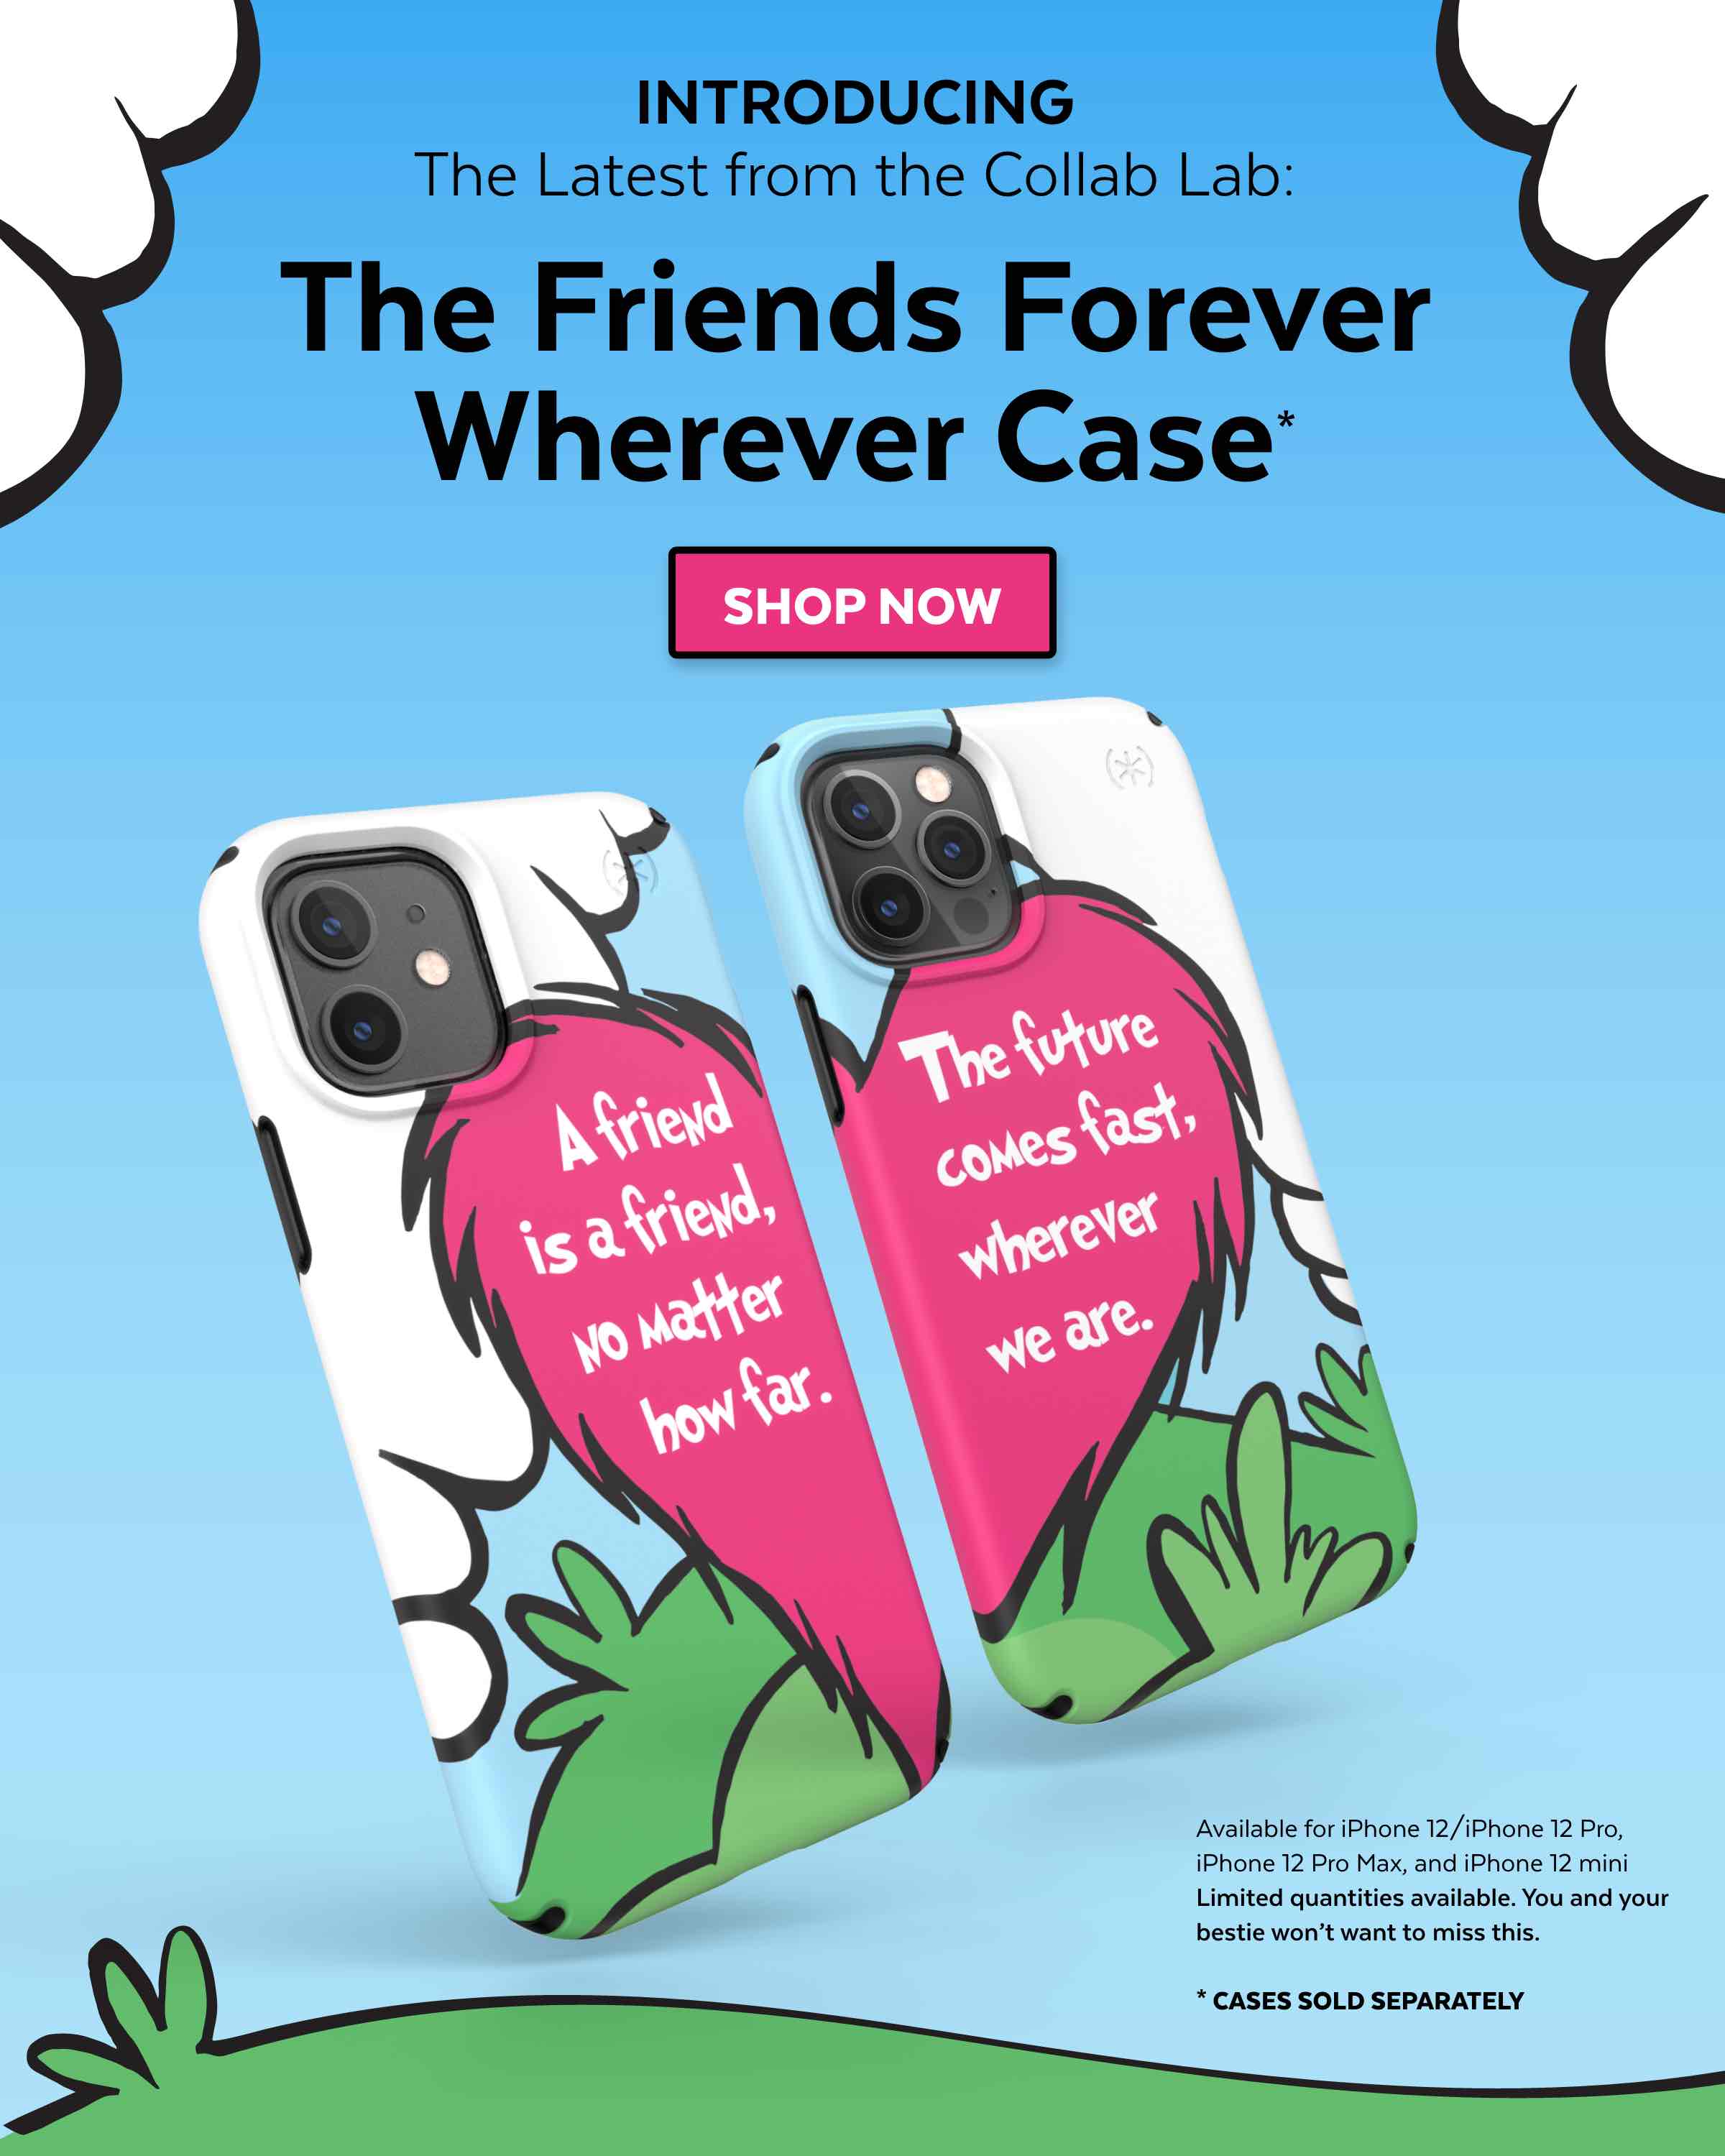 Introducing the latest from the Collab Lab: The Friends Forever Wherever Case. Shop now.